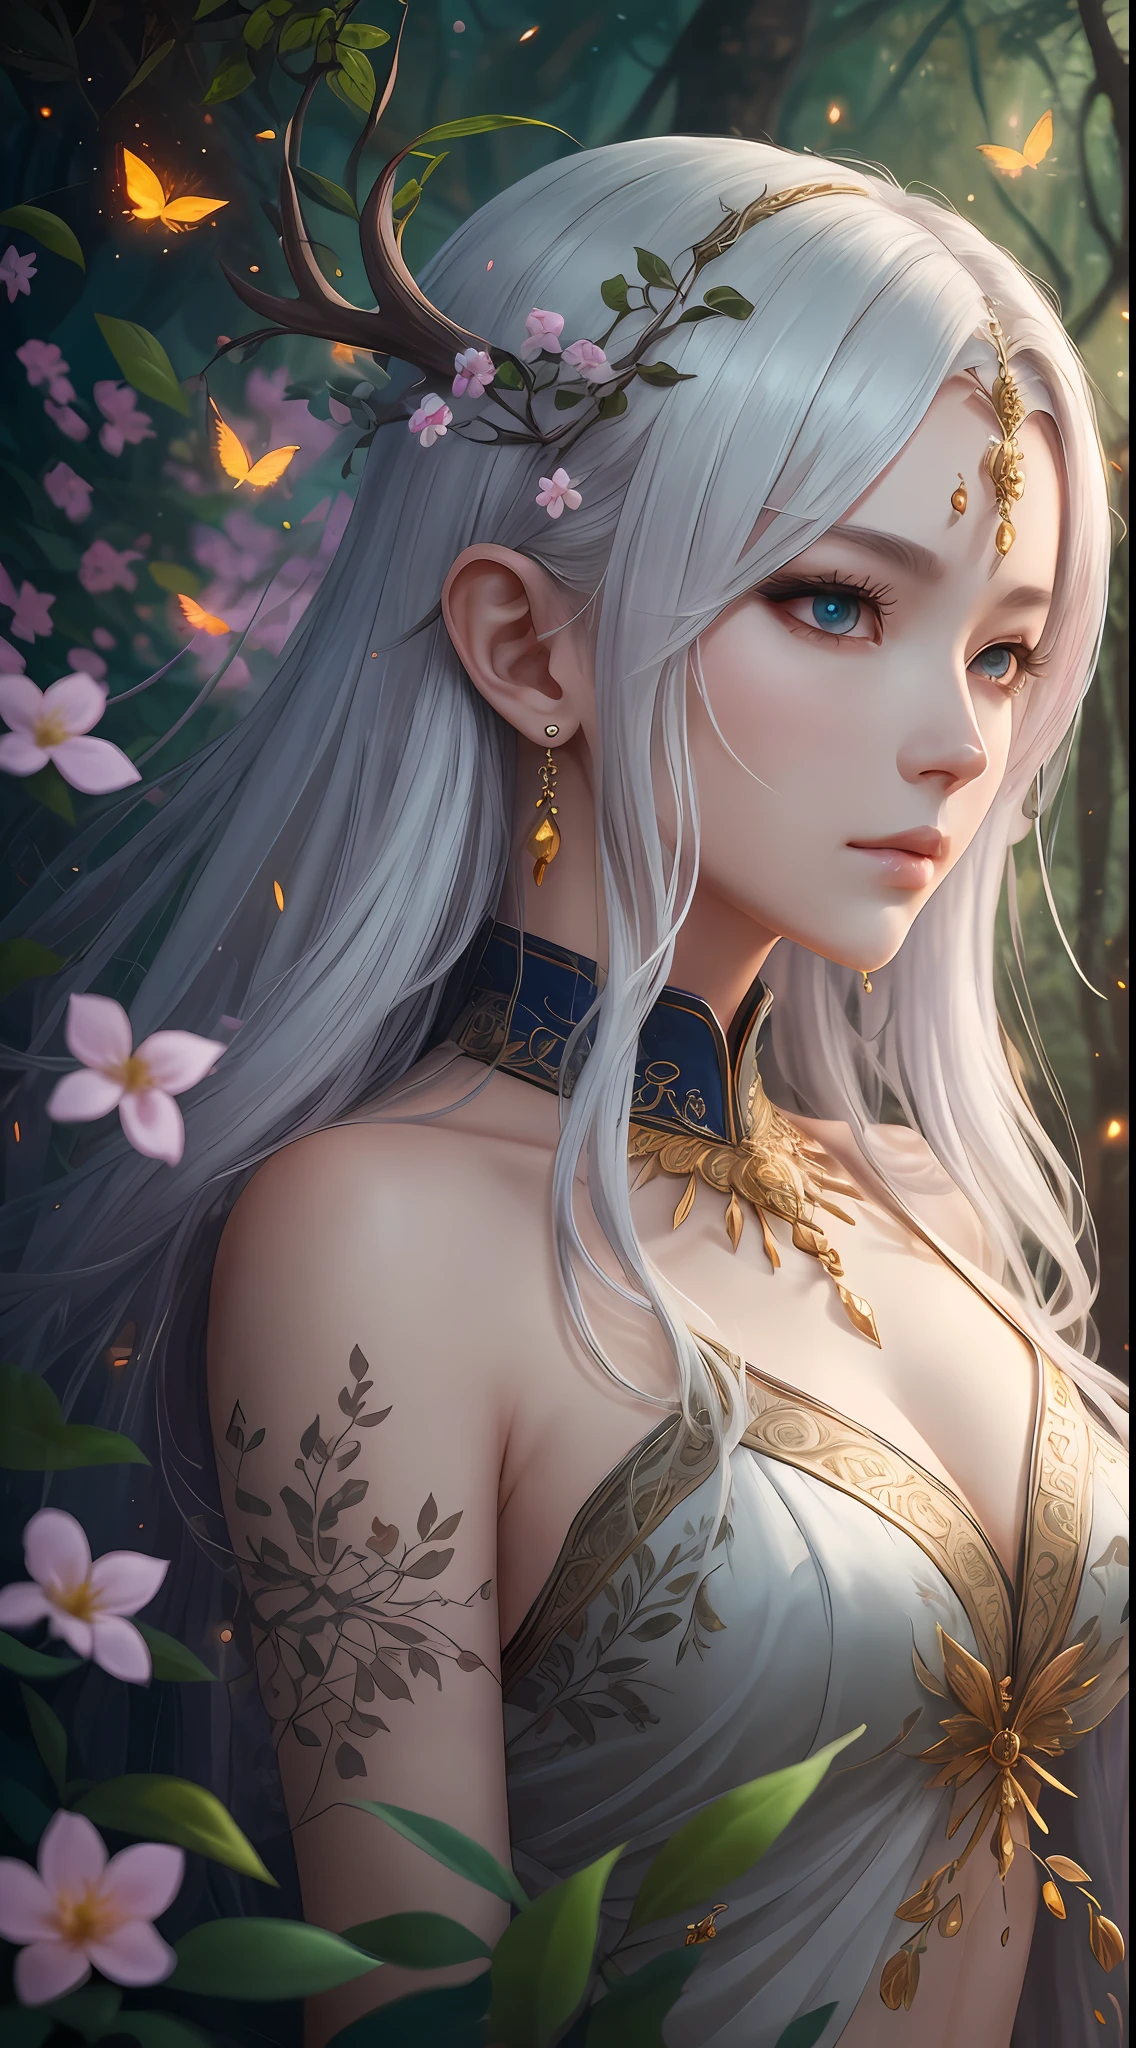 Masterpiece, best quality, (very detailed CG unified 8k wallpaper), (best quality), (best illustration), (best shadow), close-up of a beauty with white hair and white mask, beautiful figure painting, Guvitz, Guwiz style artwork, white-haired god, Yang J, epic exquisite character art, amazing character art, Fan Qi, Wu Zhun Shifan, Guwiz in pixiv art station, glowing elf, with a glowing deer, drinking water in the pool, Natural elements in forest theme. Mysterious forest, beautiful forest, nature, surrounded by flowers, delicate leaves and branches surrounded by fireflies (natural elements), (jungle theme), (leaves), (branches), (fireflies), (particle effects) and other 3D, Octane rendering, ray tracing, super detailed